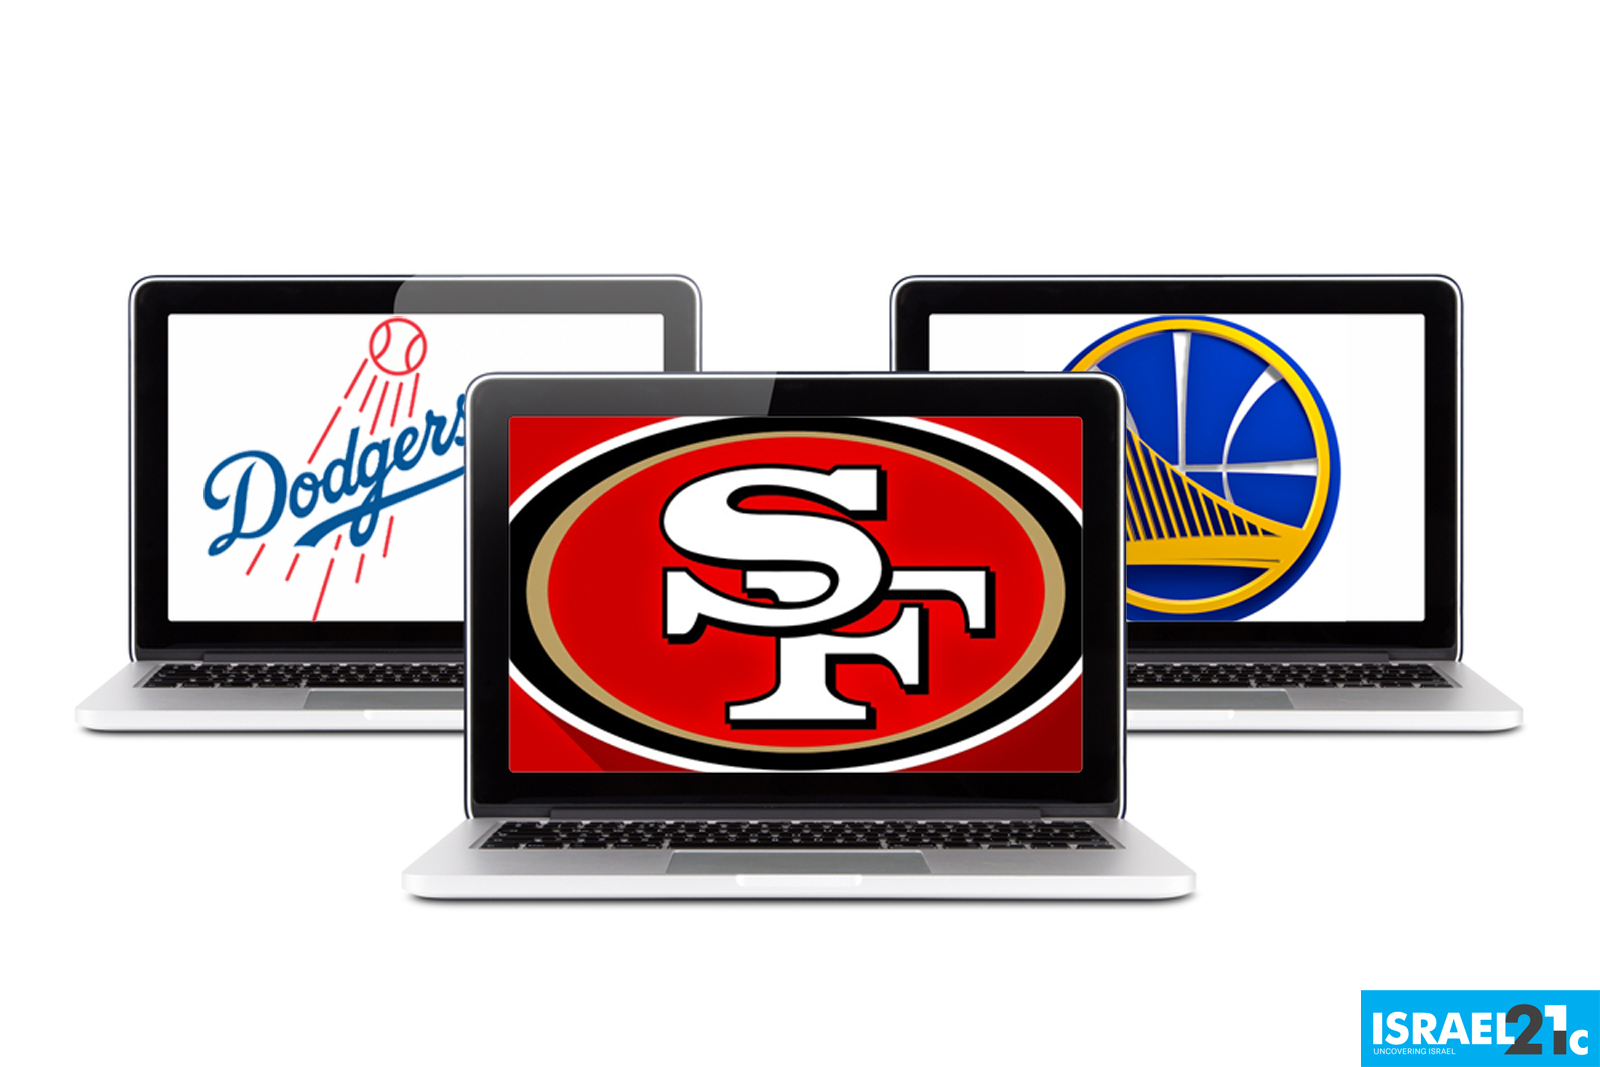 US sports leagues seek Israeli technologies. Illustration uses logos of 49ers, Dodgers, Warriors/vector by Shutterstock.com/graphic layout by Viva Sarah Press for ISRAEL21c